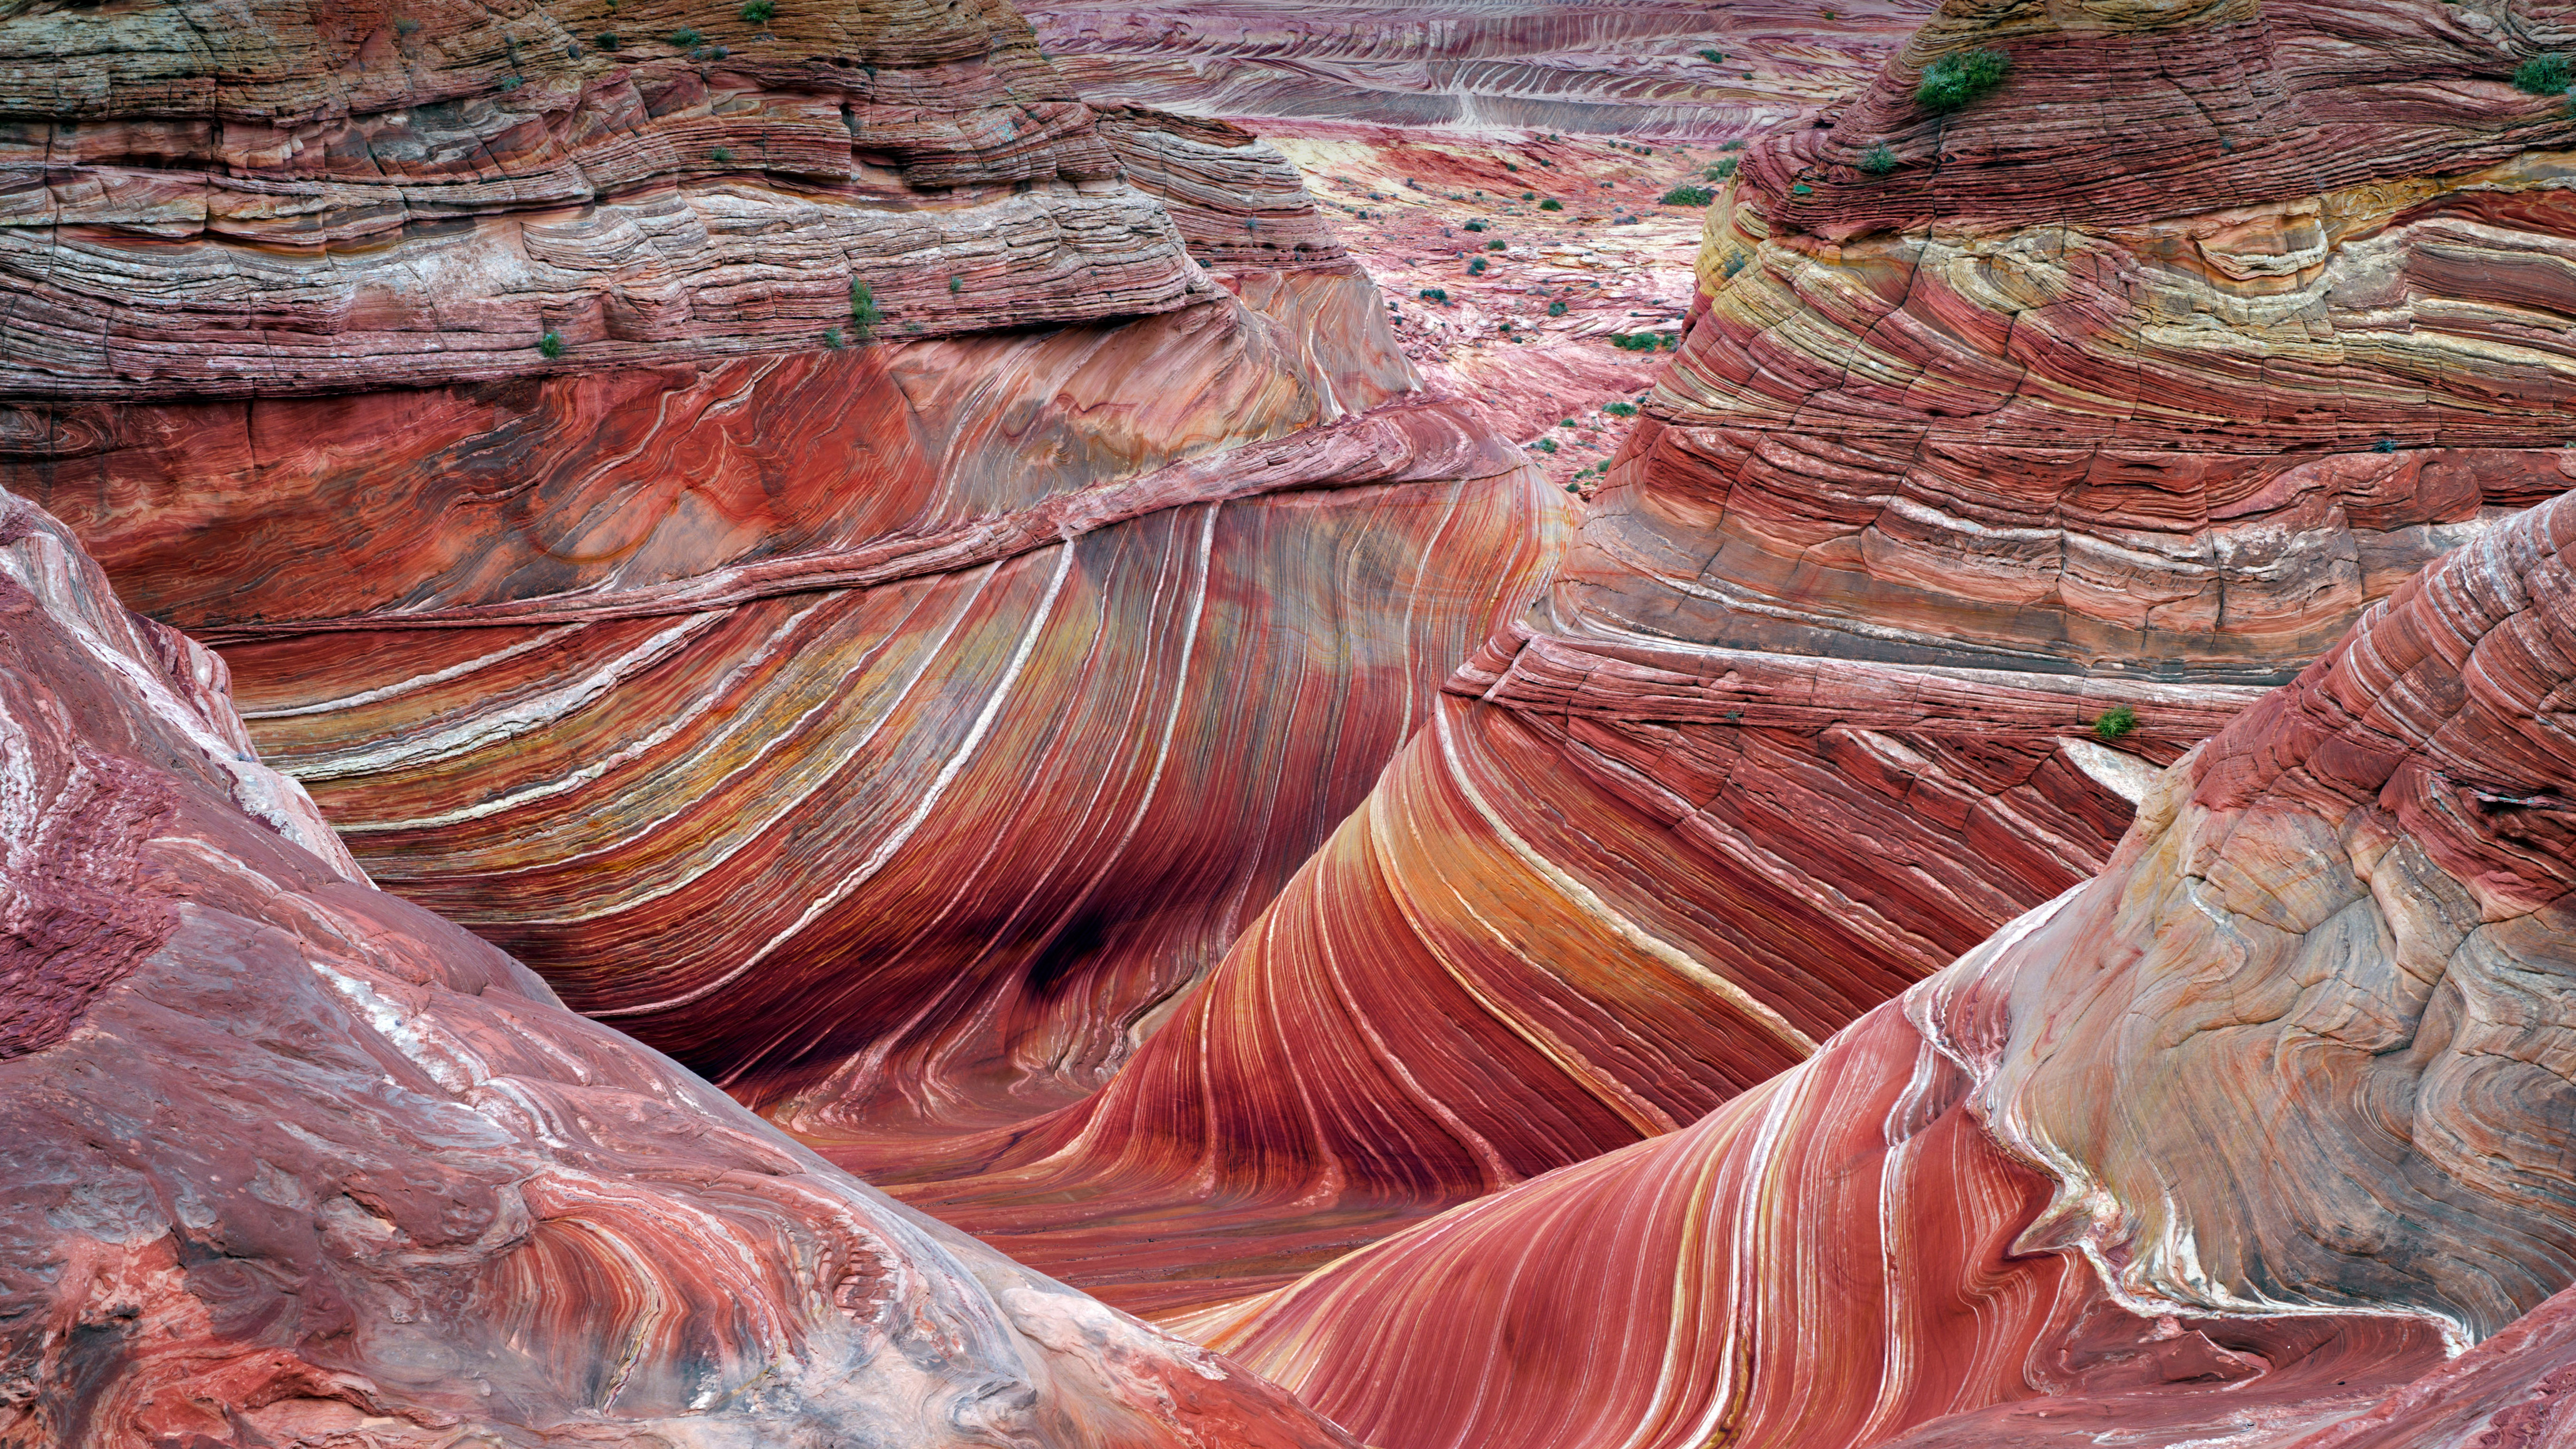 The Wave - Coyote Buttes North, Paria Canyon-Vermilion Cliffs National Monument, Arizona by Dennis Frates